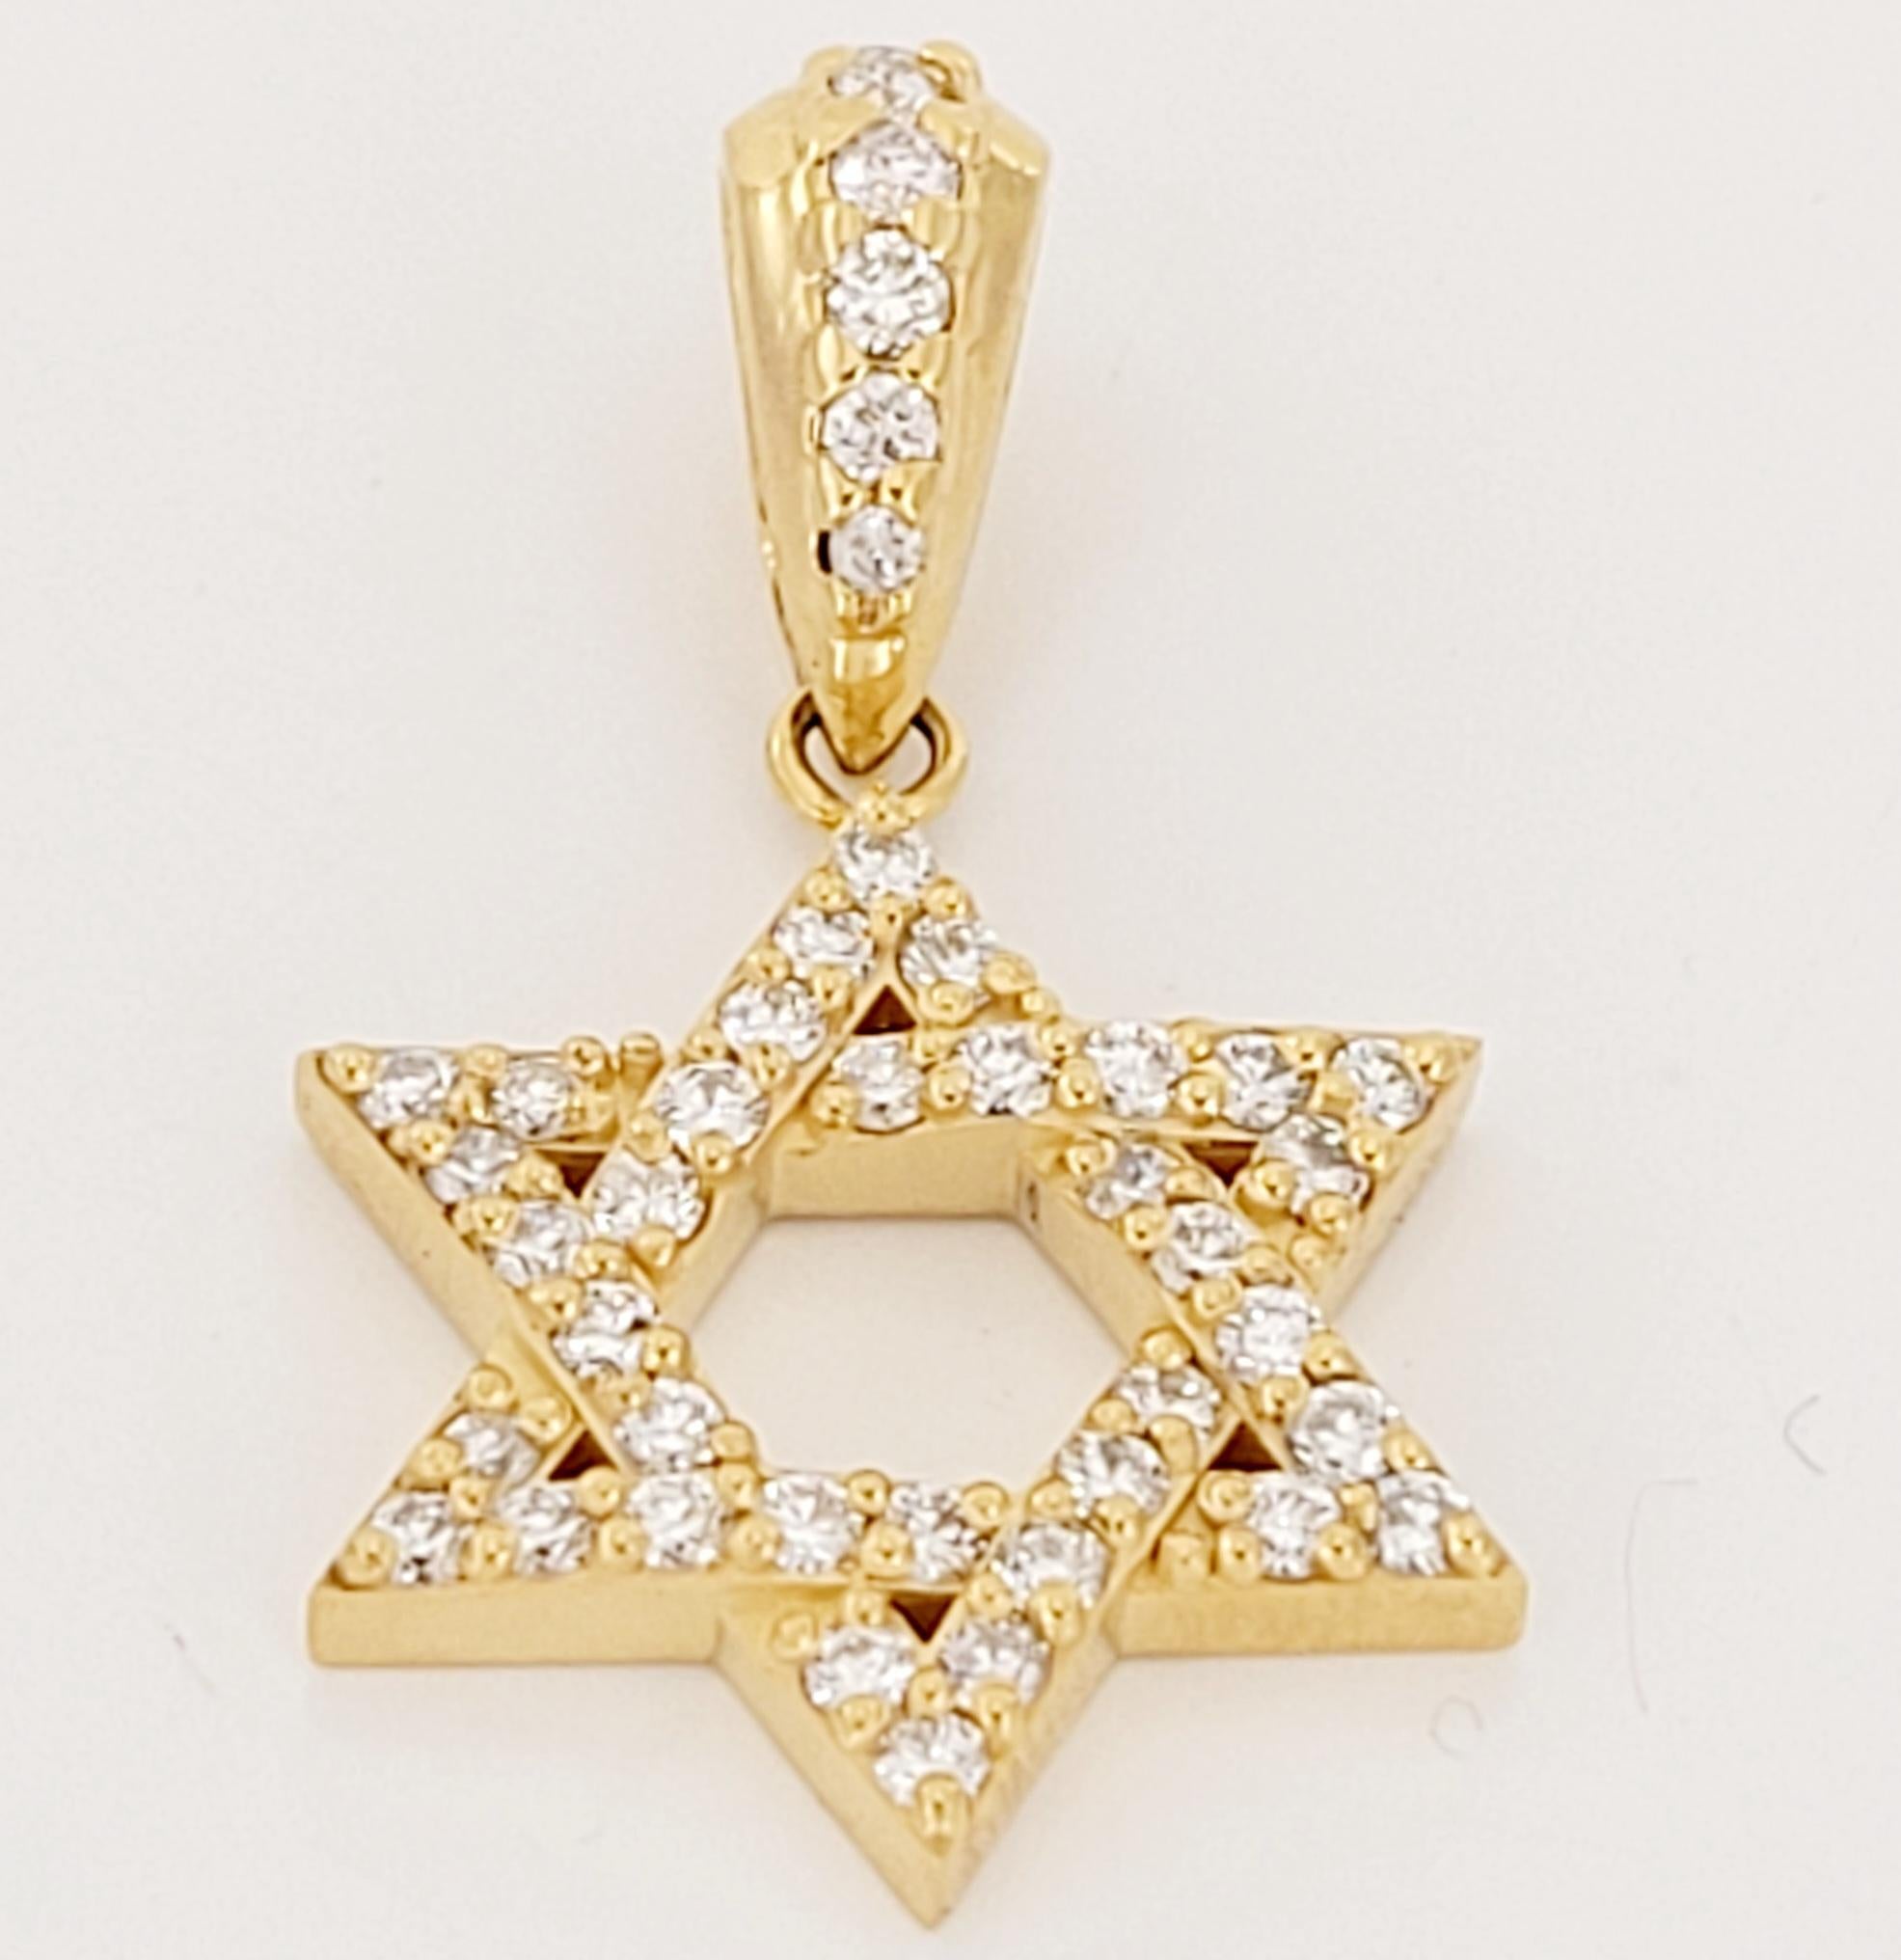 Unbranded Pendant with Bail
Material 14K Yellow gold
Pendant width 20.7mm
Length with bail 32mm
Diamonds .90ct
Diamond Clarity VS
Color Grade G
Condition New, without tags
Retail Price$ 1950